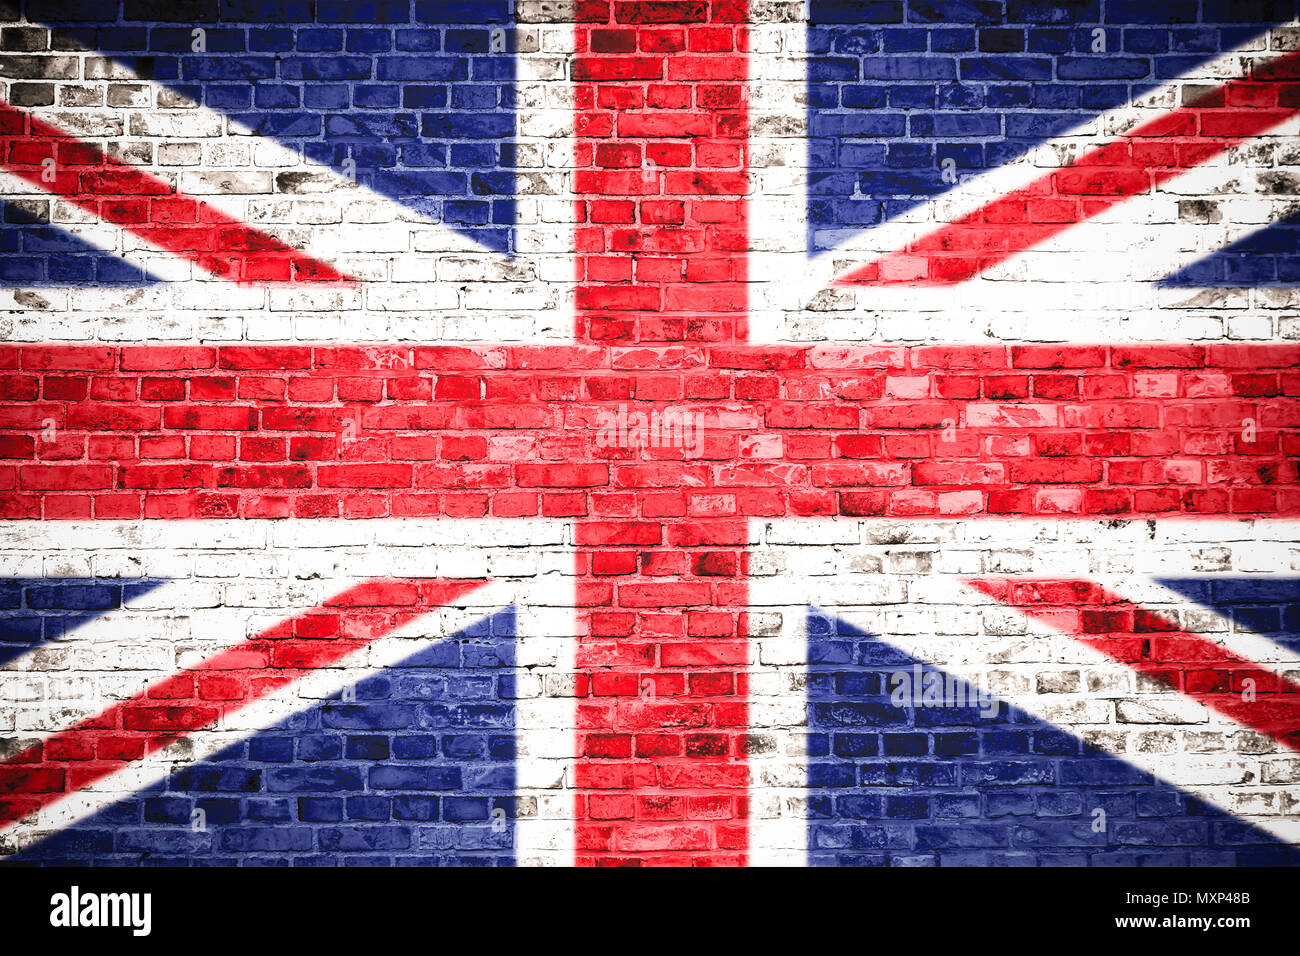 United Kingdom (UK) flag painted on a brick wall. Concept image for Great Britain, British, England, English language , people and culture. Stock Photo